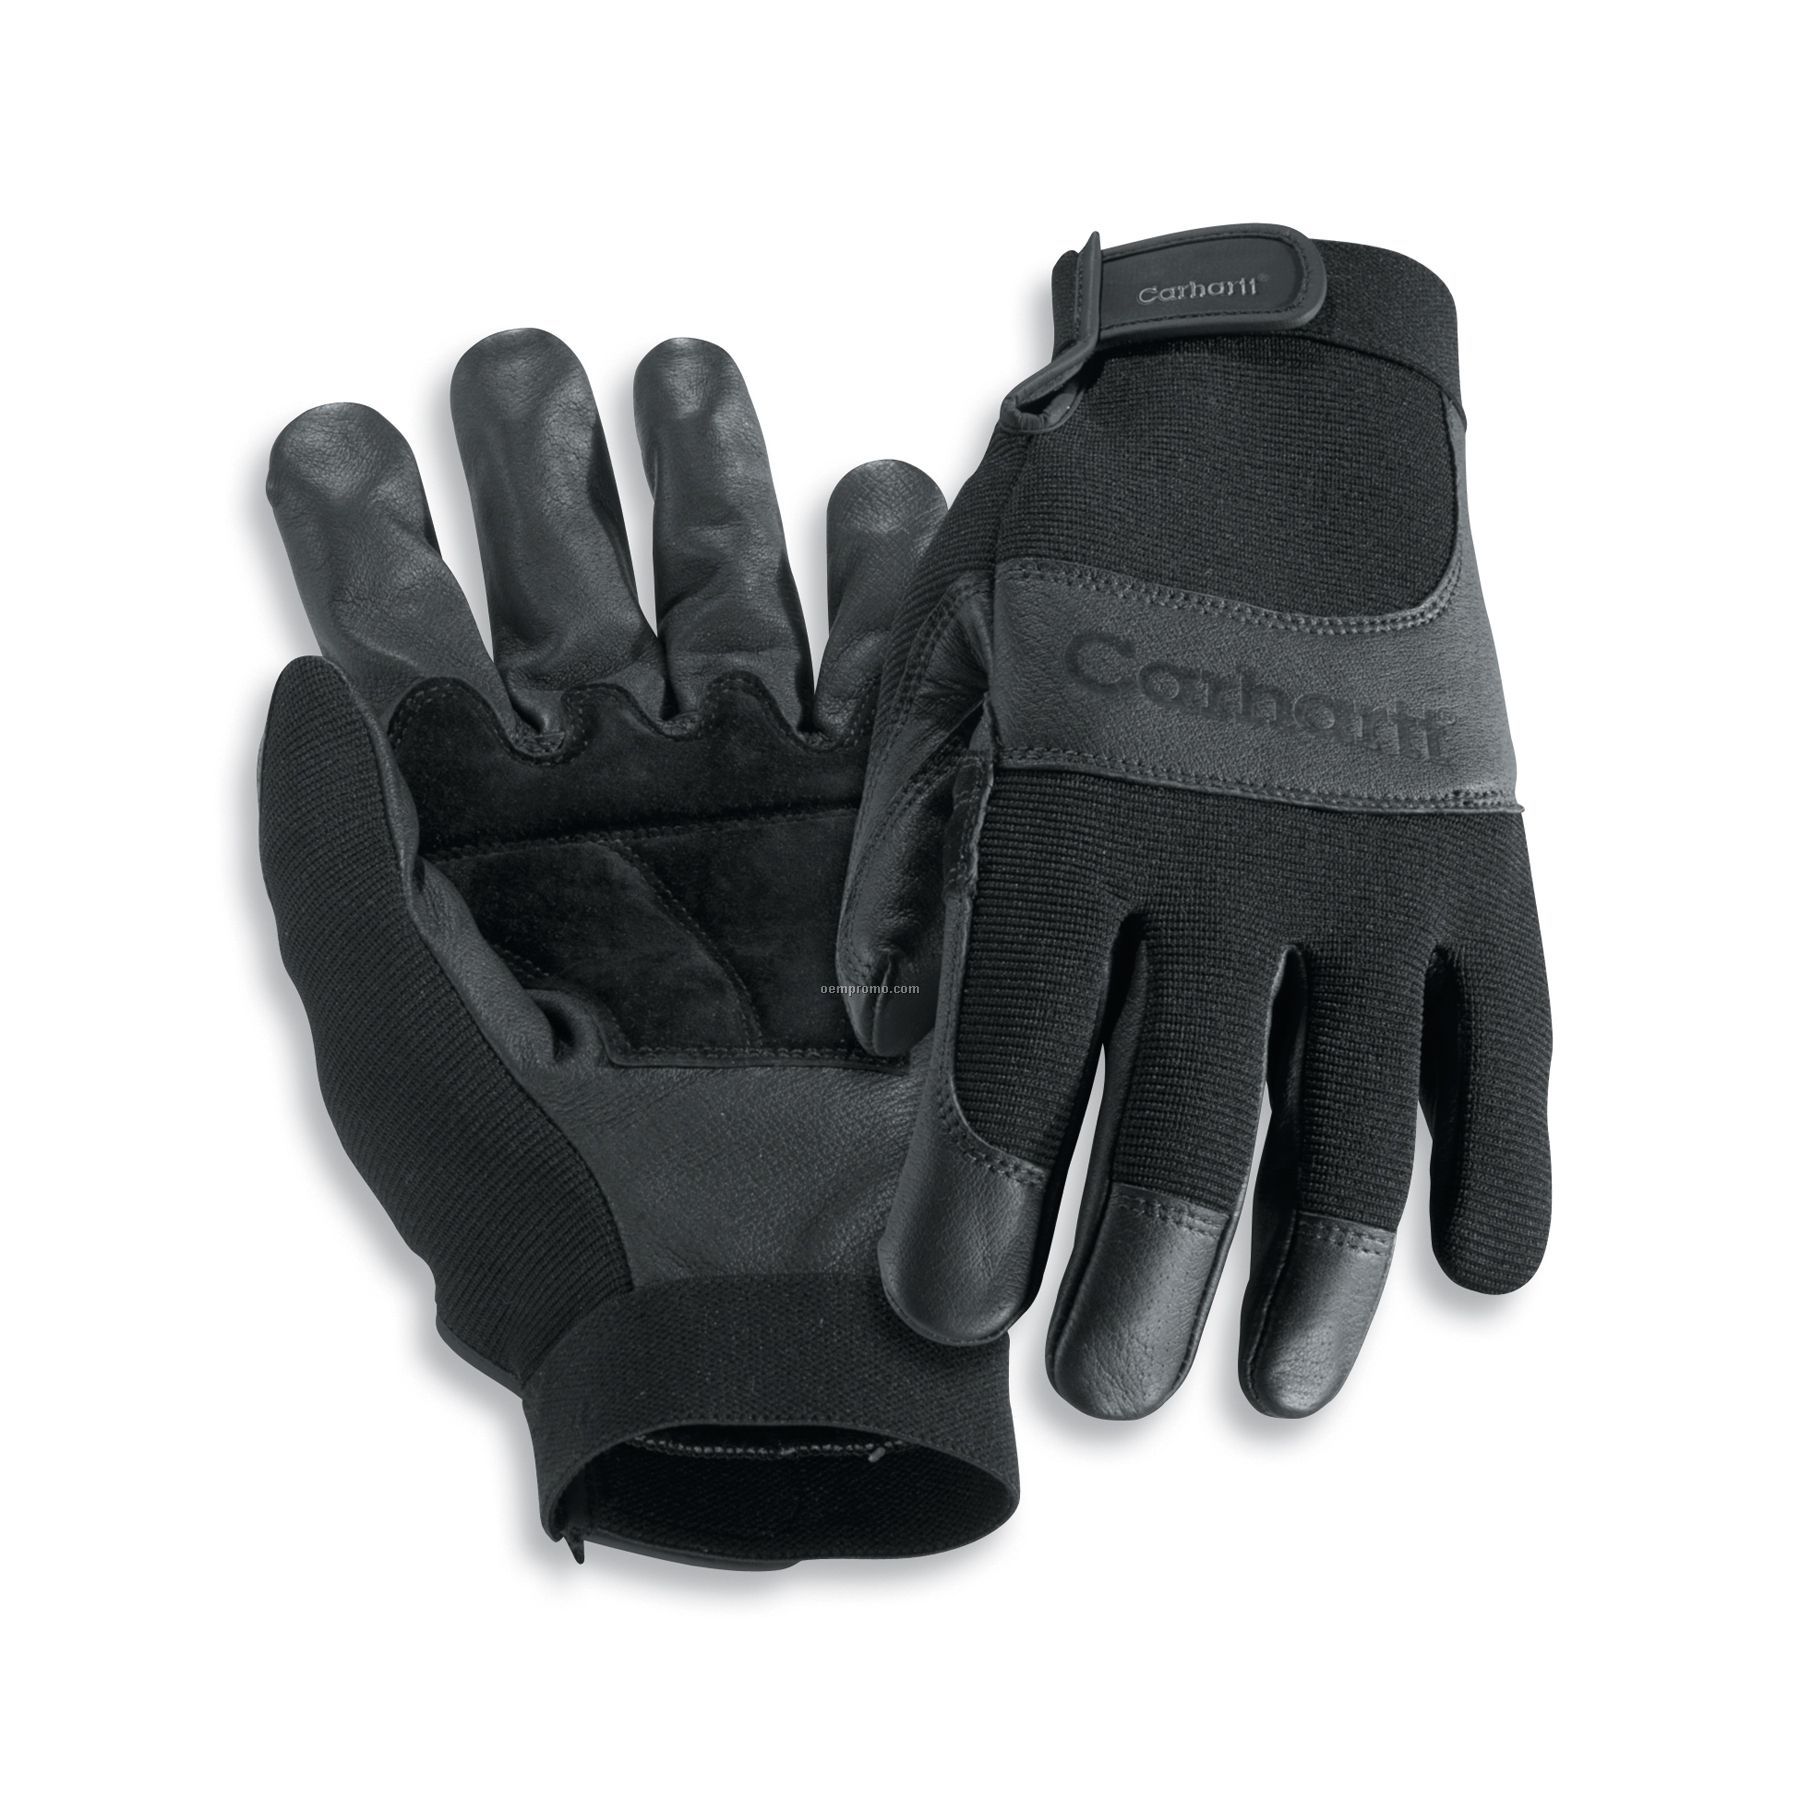 Carhartt Men's Leather Utility Glove With Black Accent / Grain Pigskin